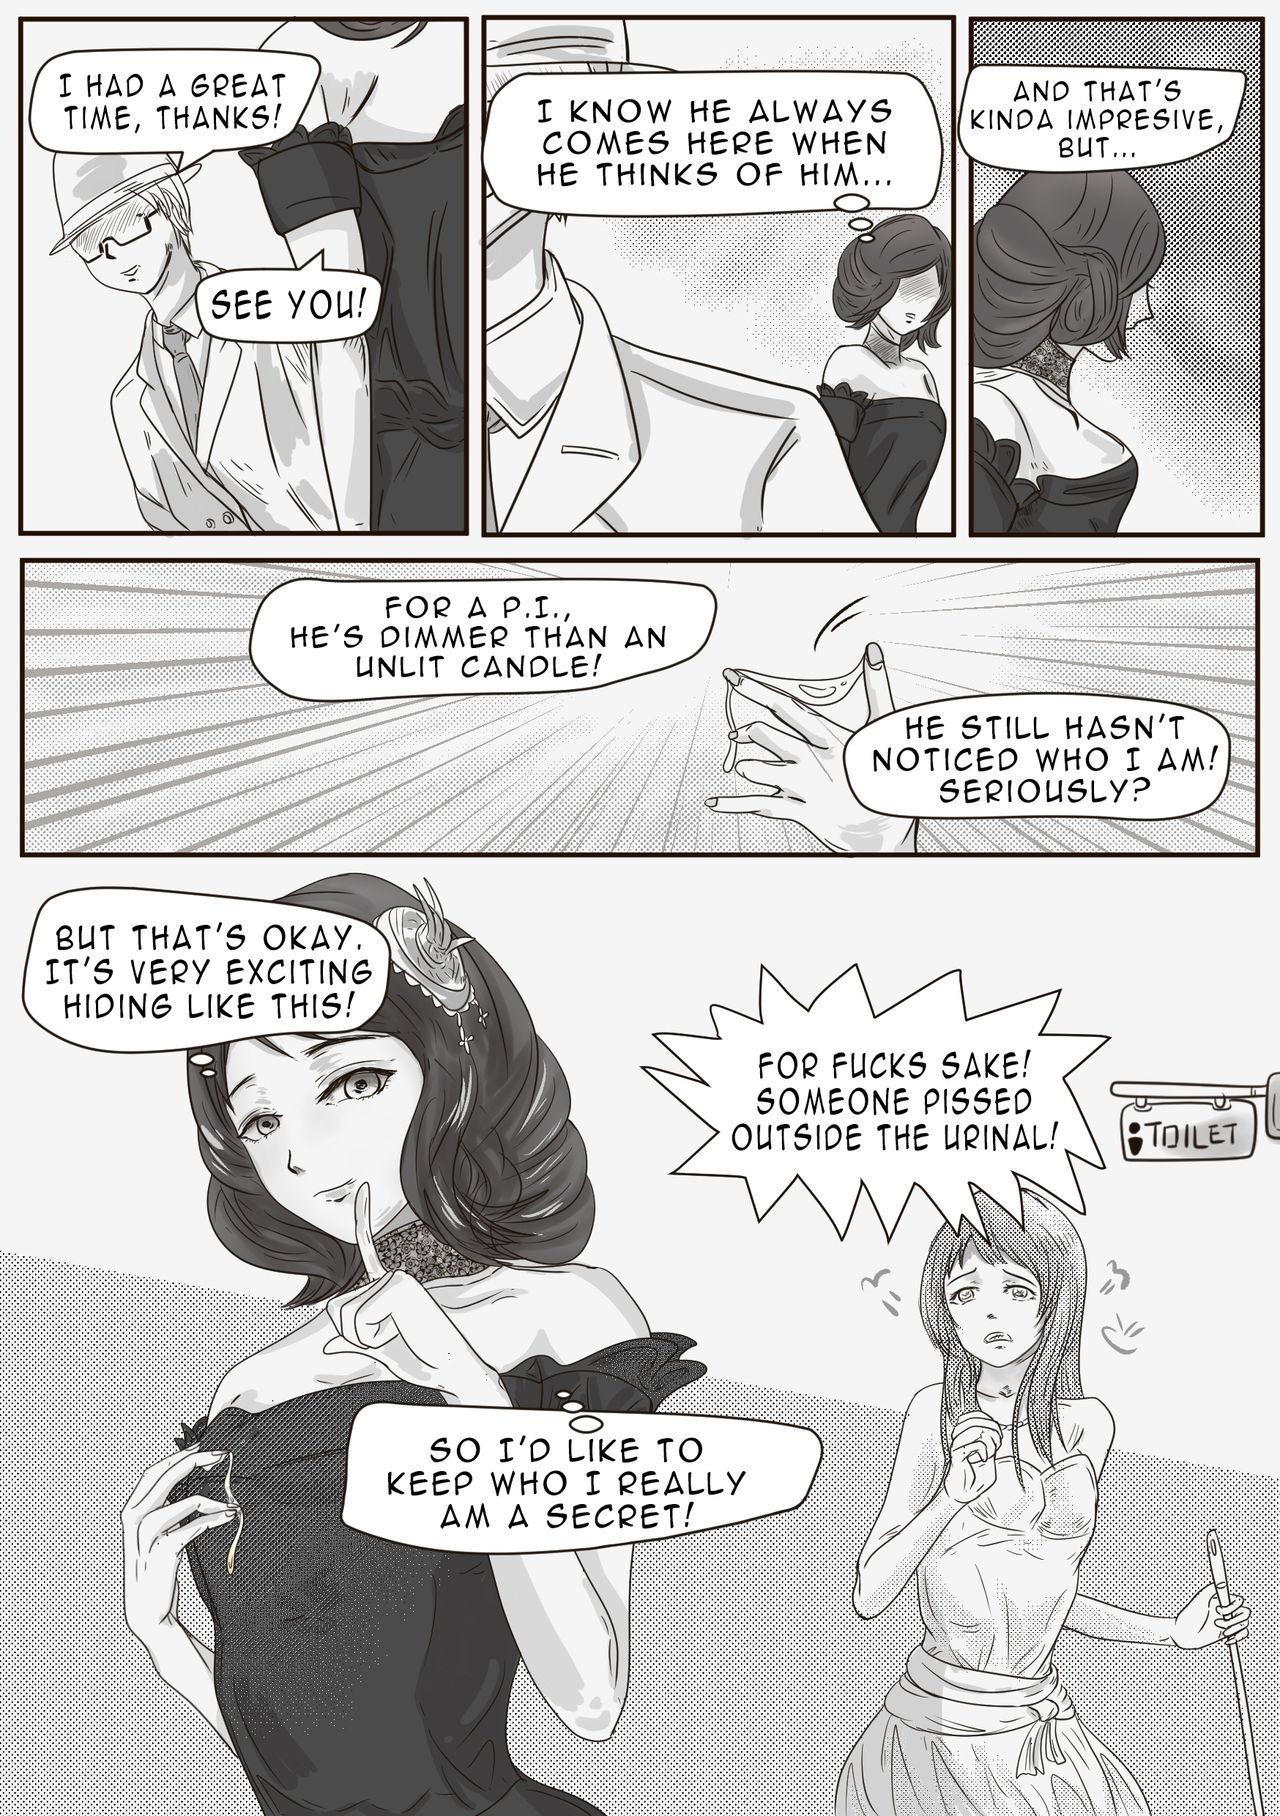 Adorable Dressed up!, crossdress in modern times - Original Tites - Page 9